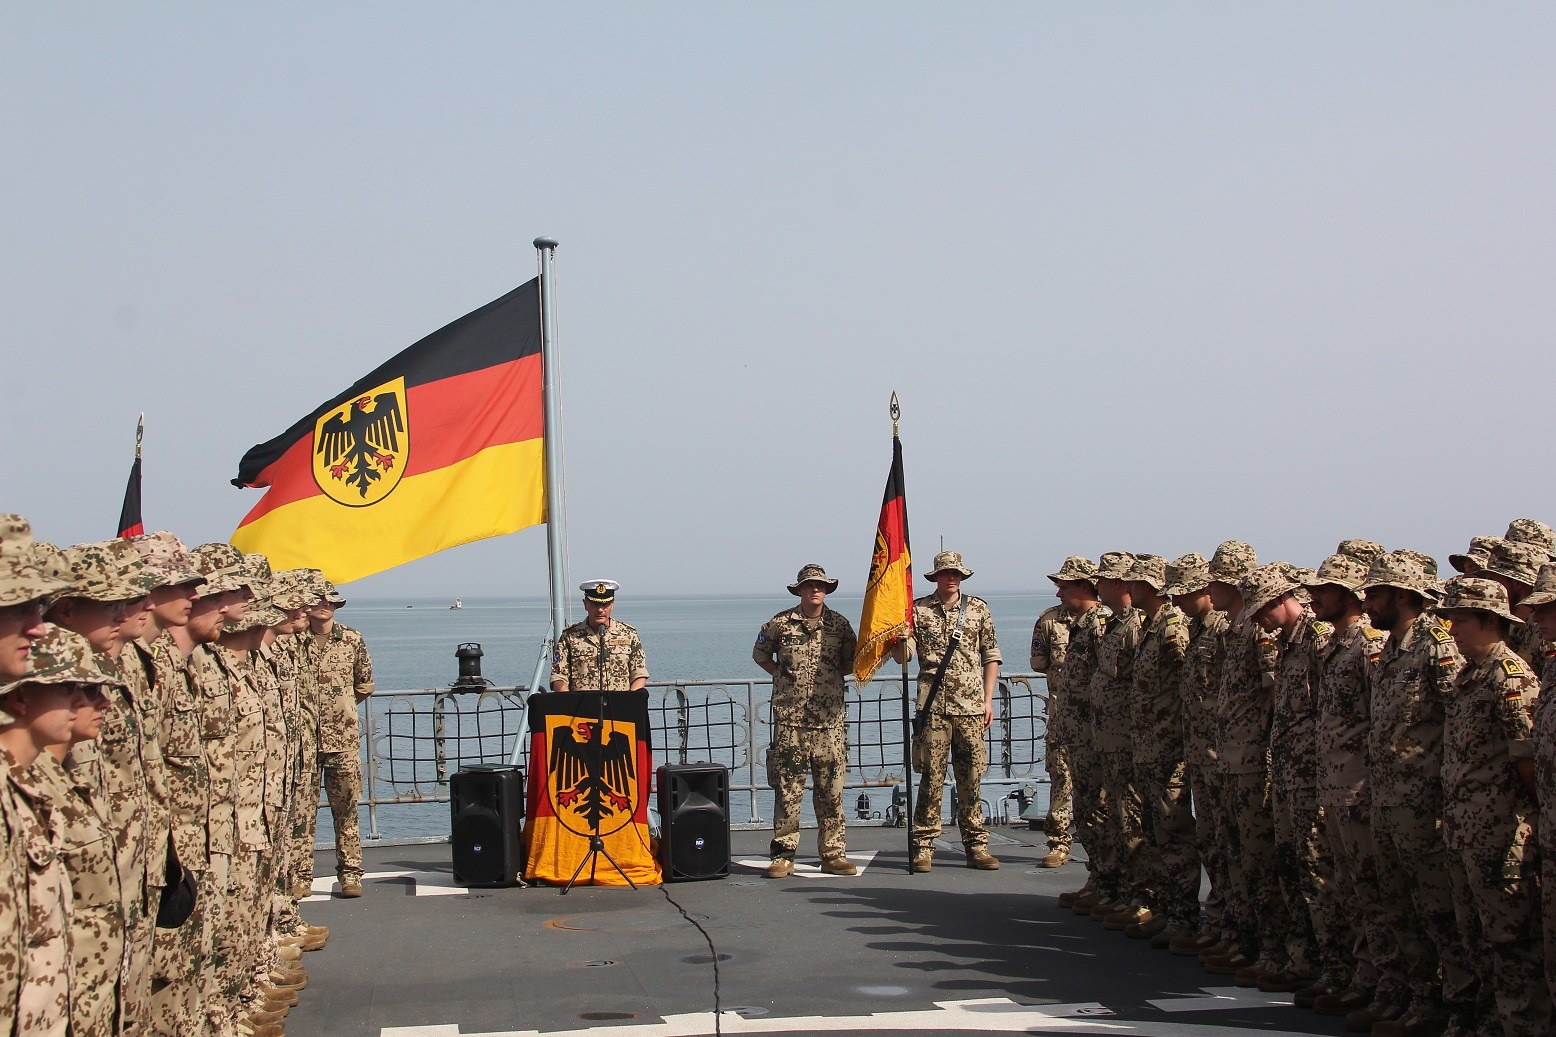 Germany's Role in the East Asian Security Architecture